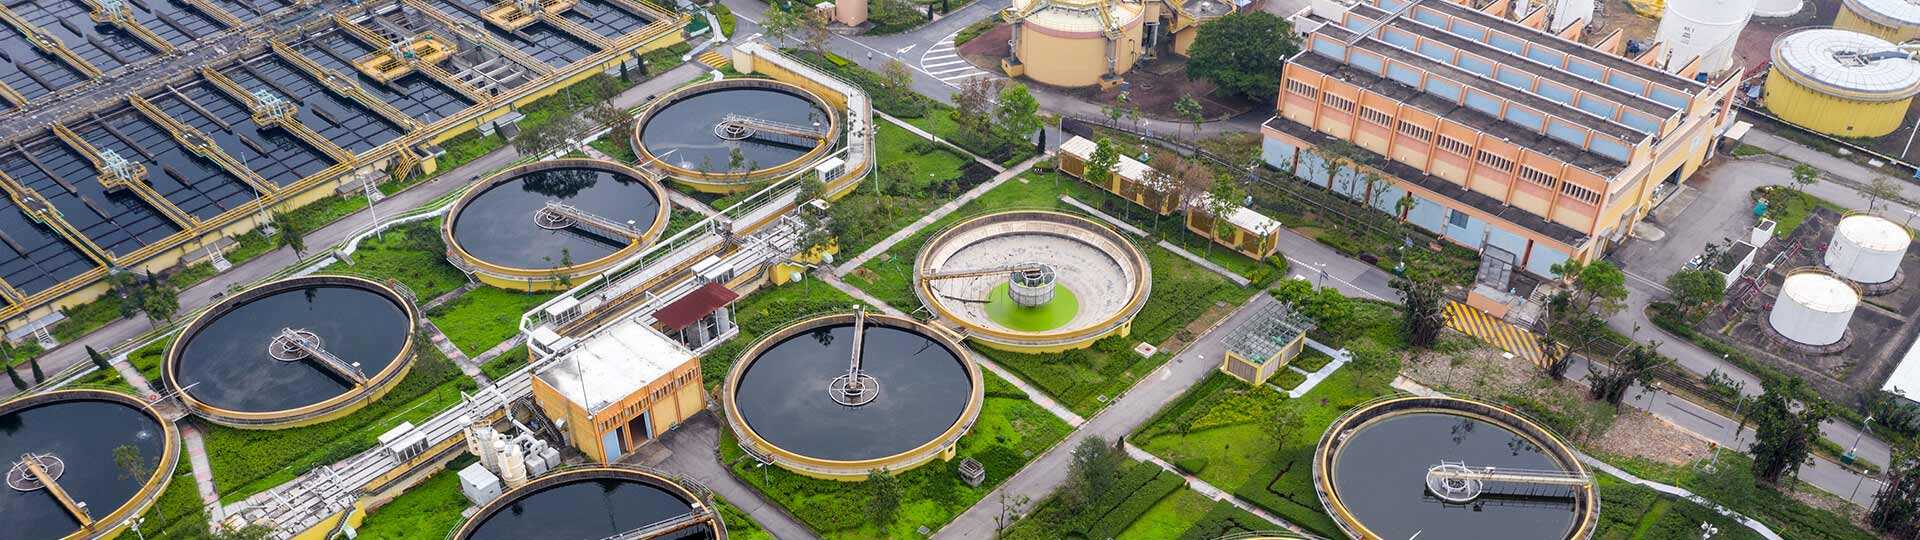 Wastewater facility